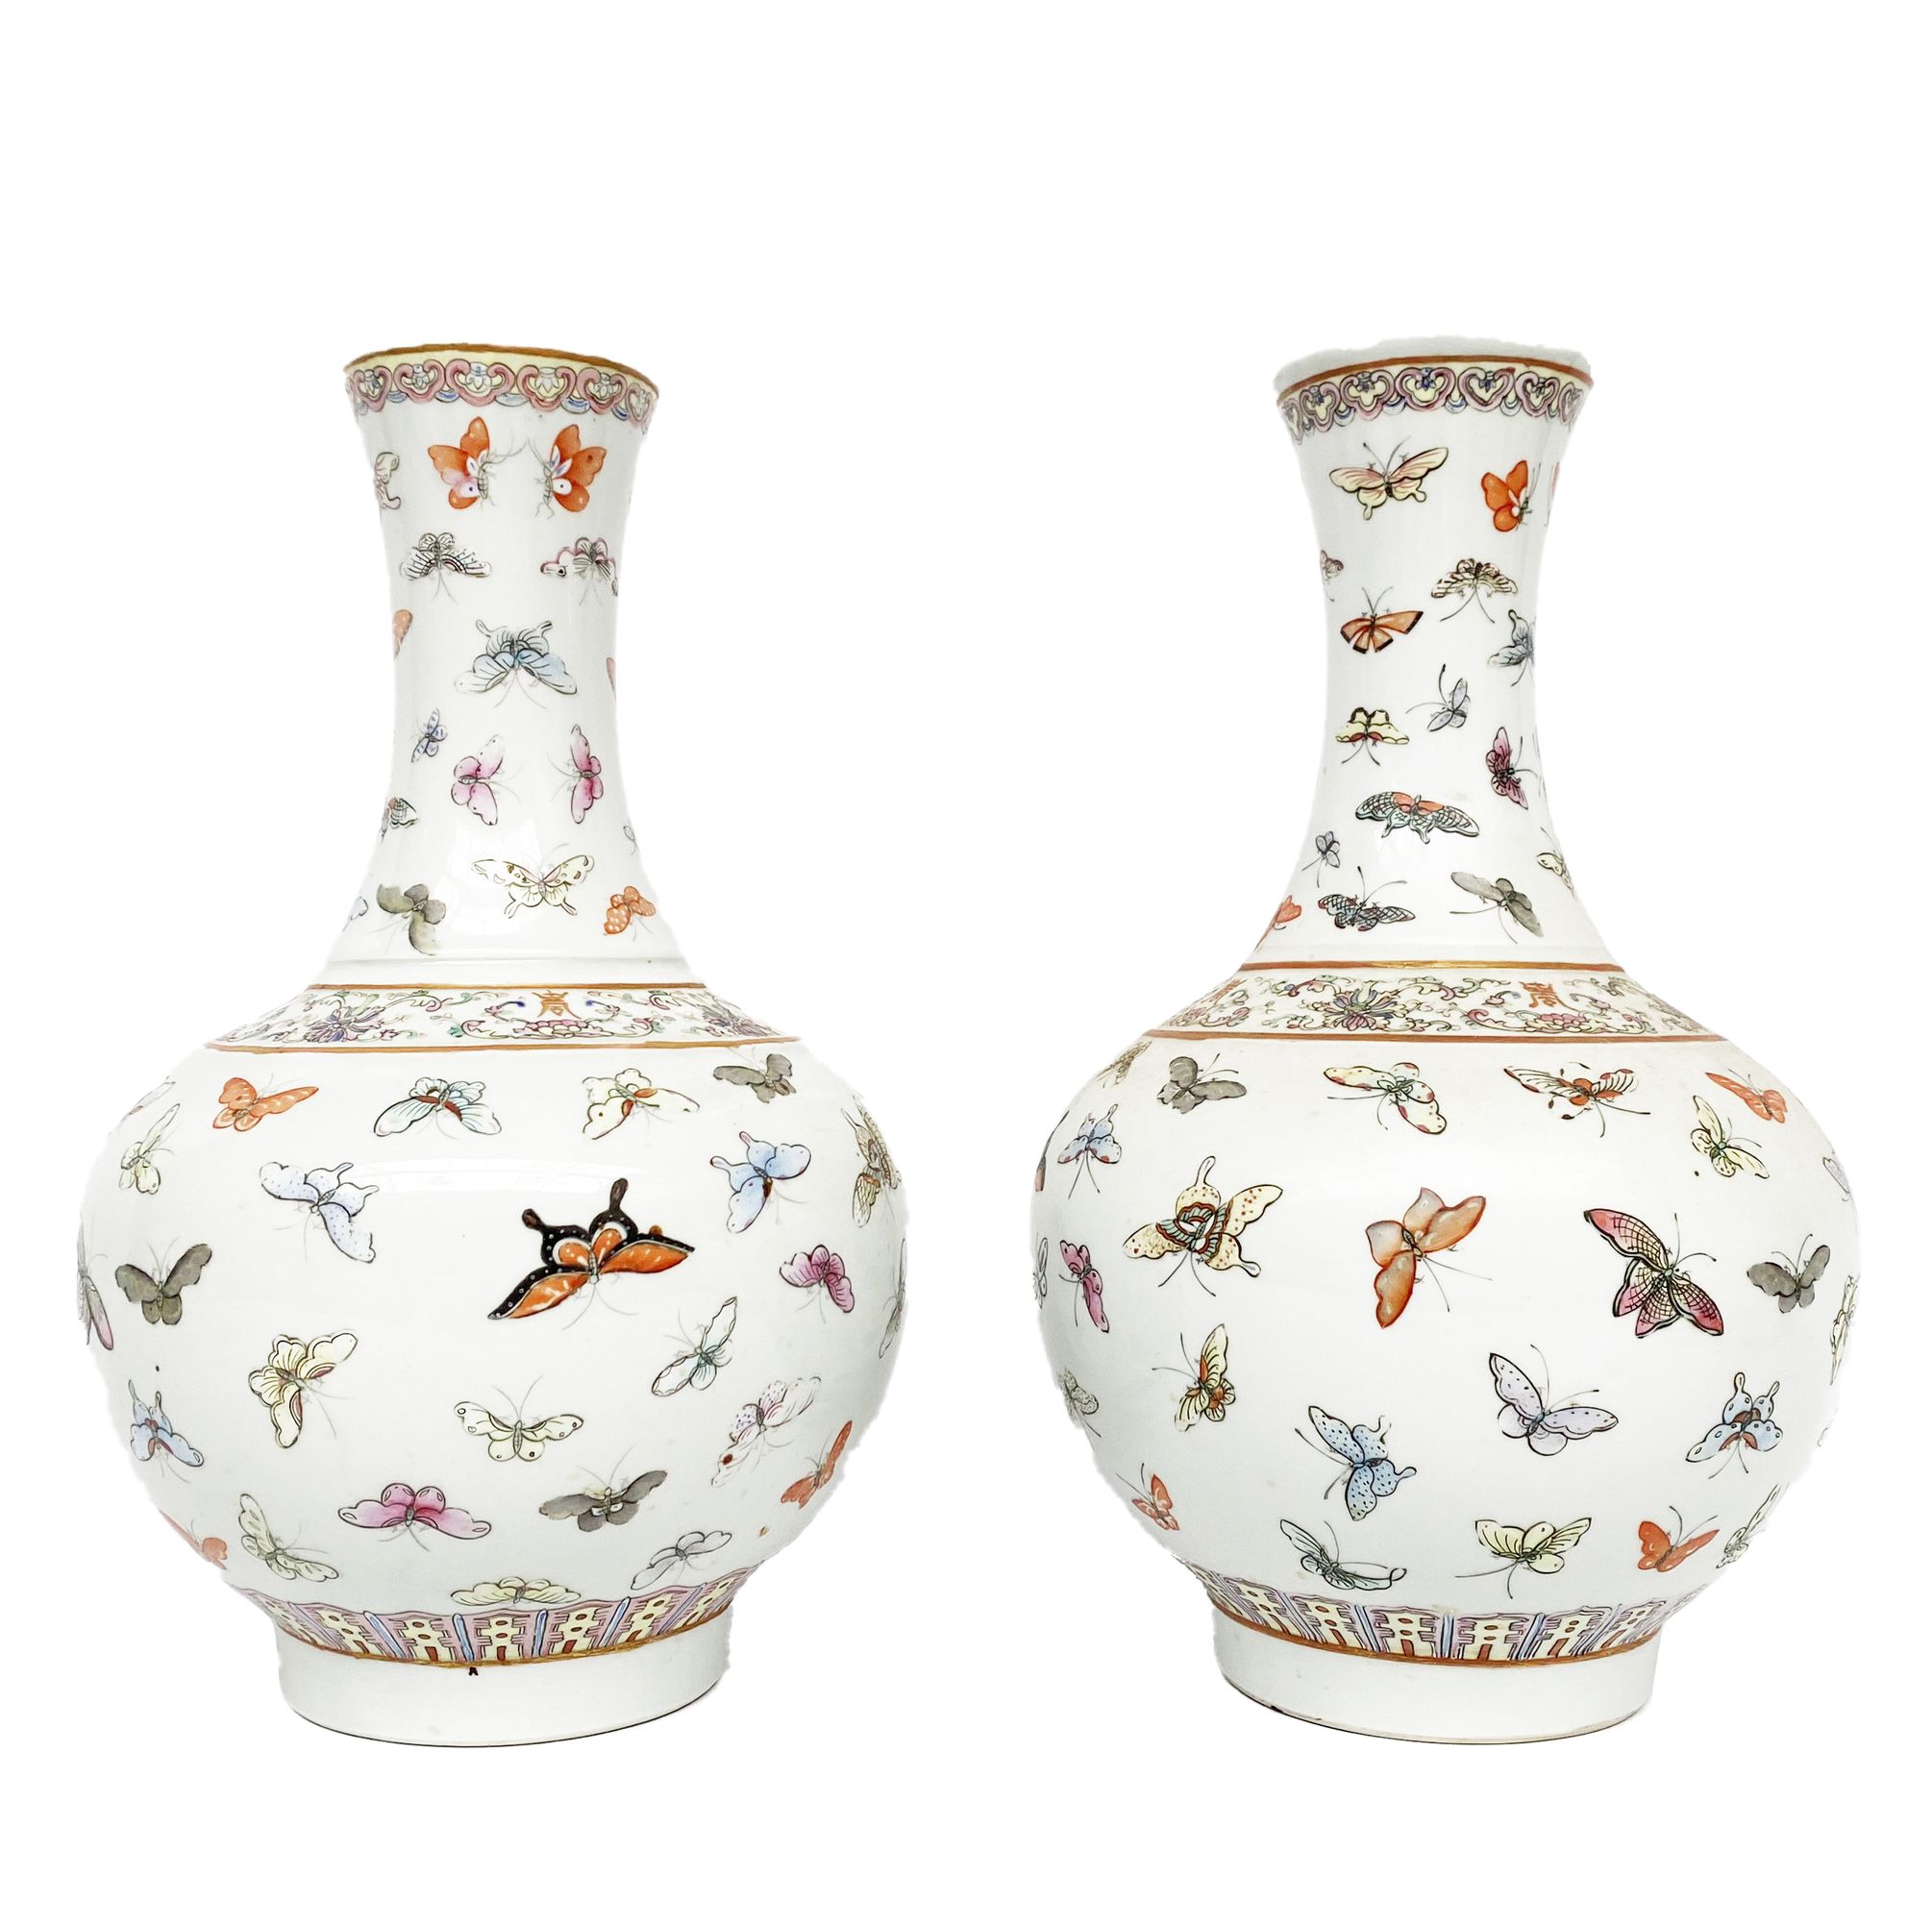 China (20th century), pair of porcelain vases